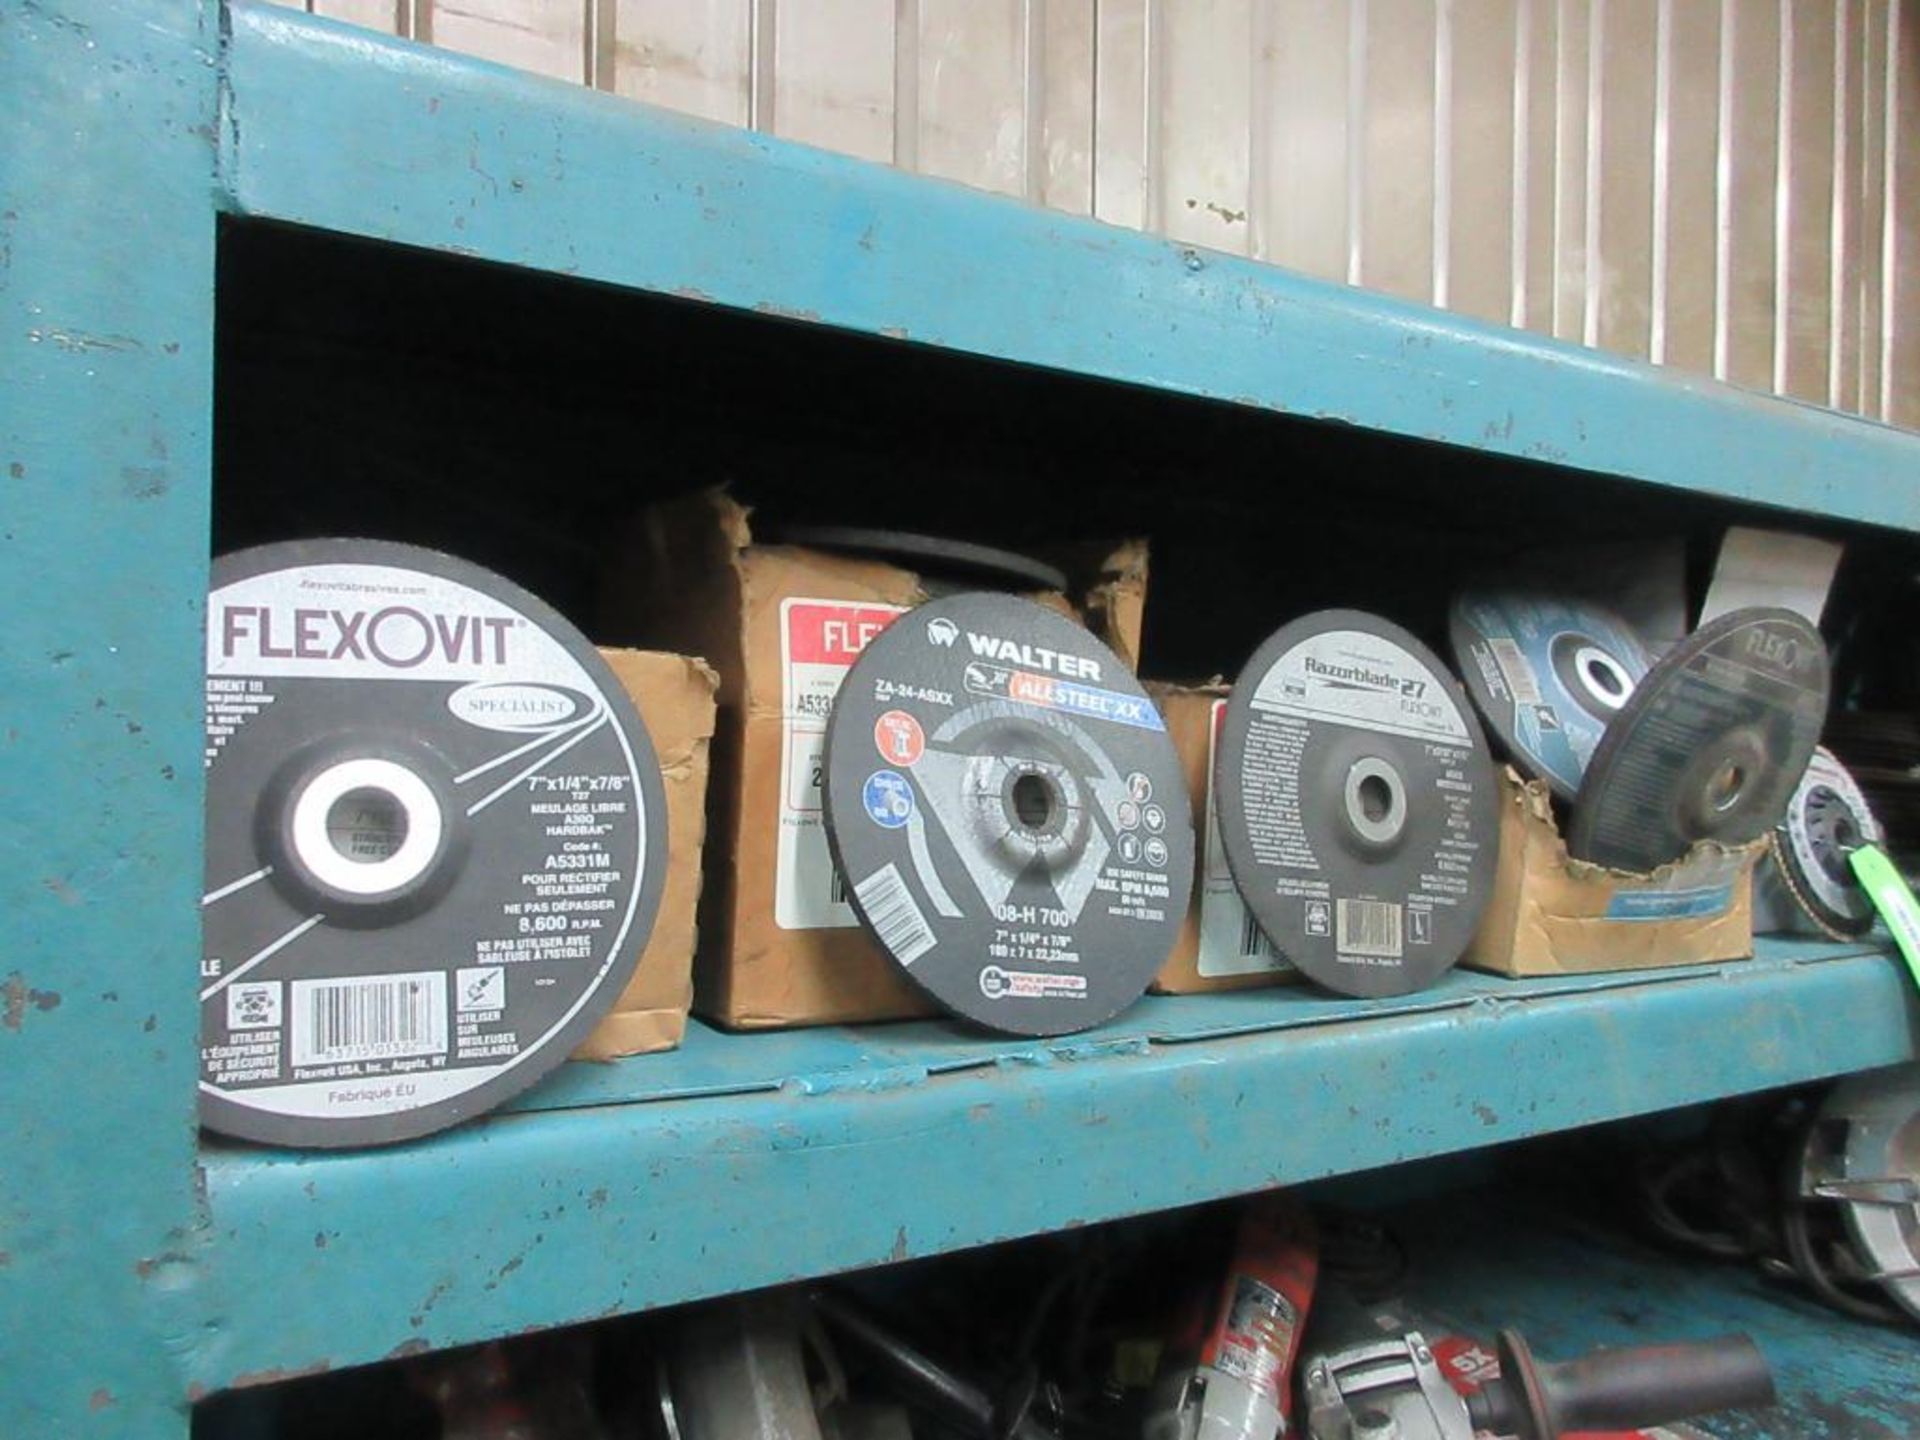 LOT OF 5 CARTONS OF 7" AND 5" GRINDING DISKS (IN CENTRAL TOOL CRIB) - Image 2 of 2